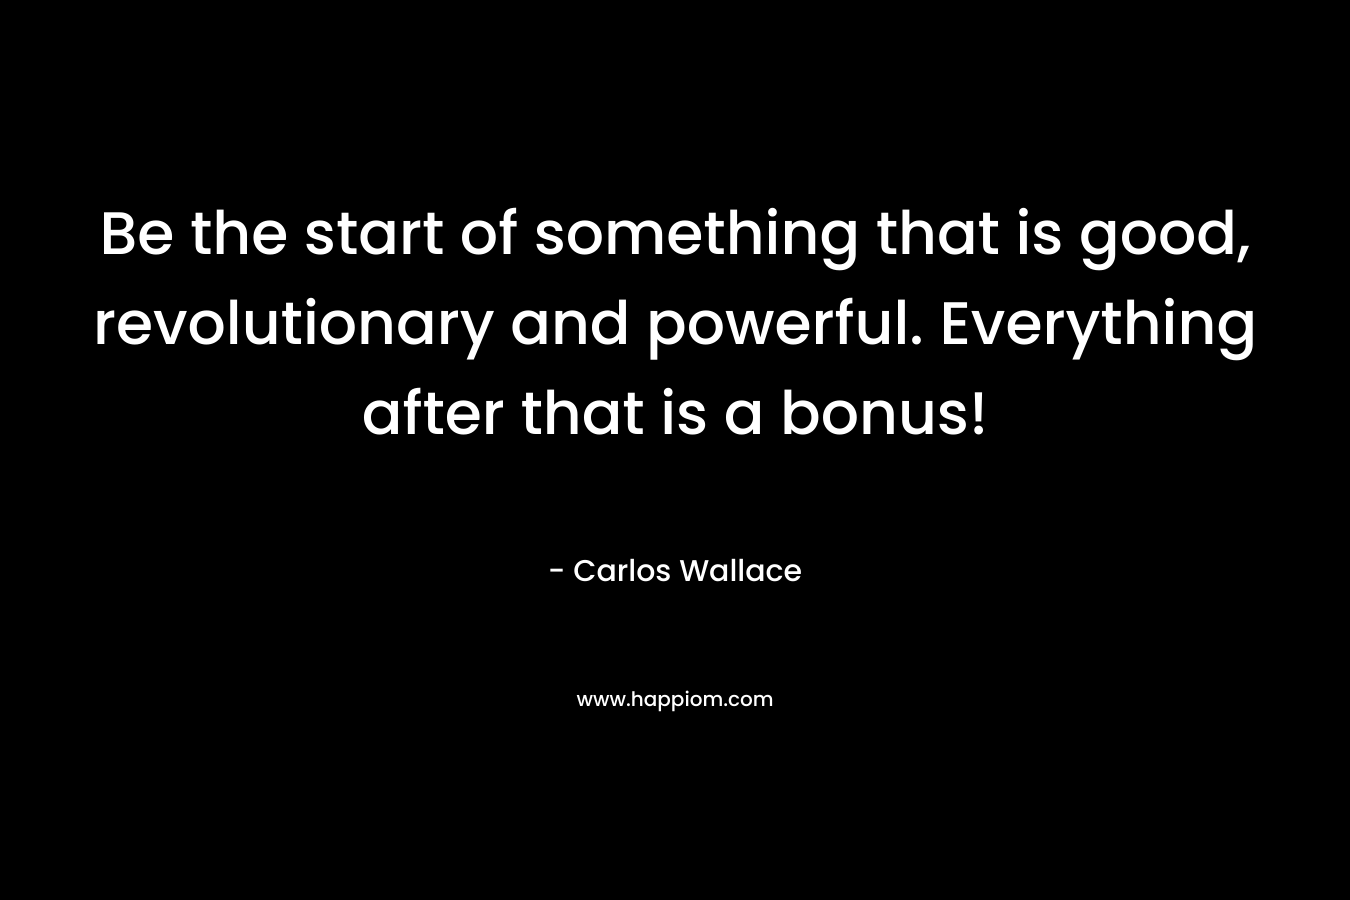 Be the start of something that is good, revolutionary and powerful. Everything after that is a bonus!